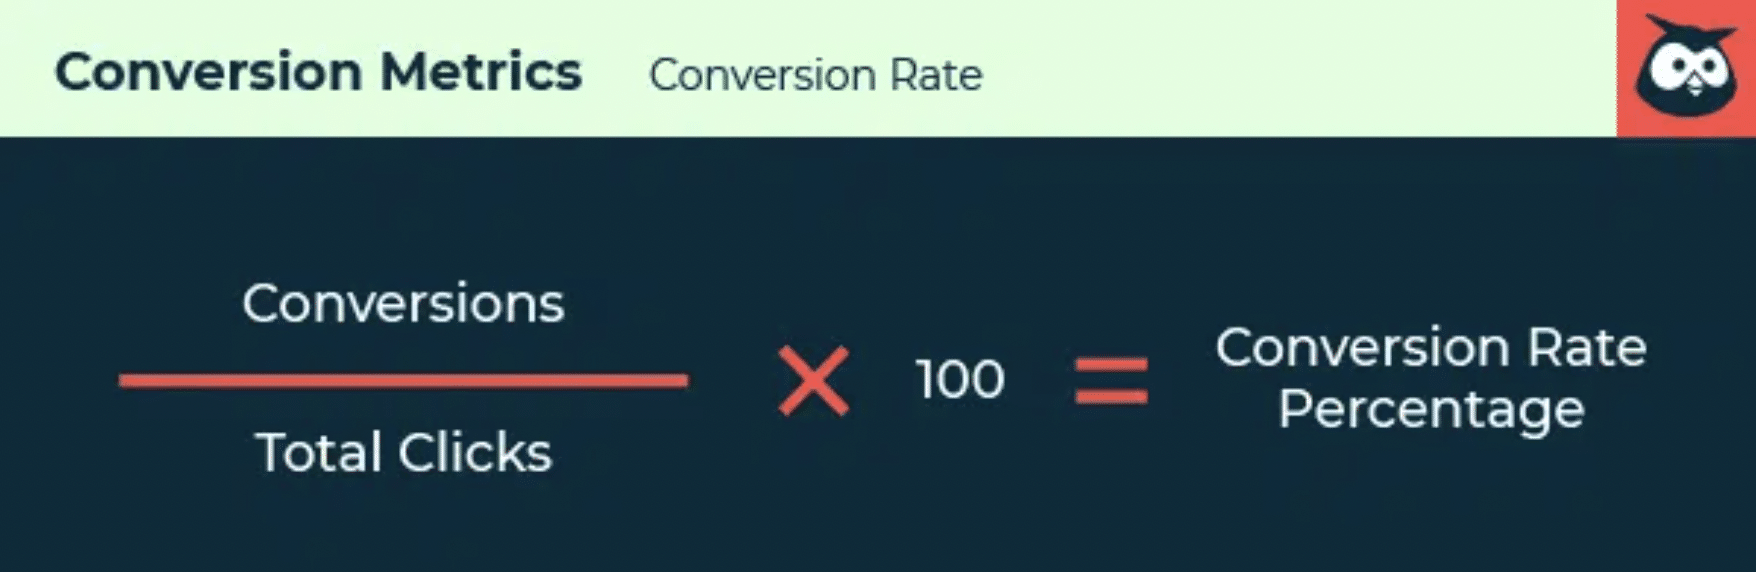 graphic shows how to calculate conversion rate